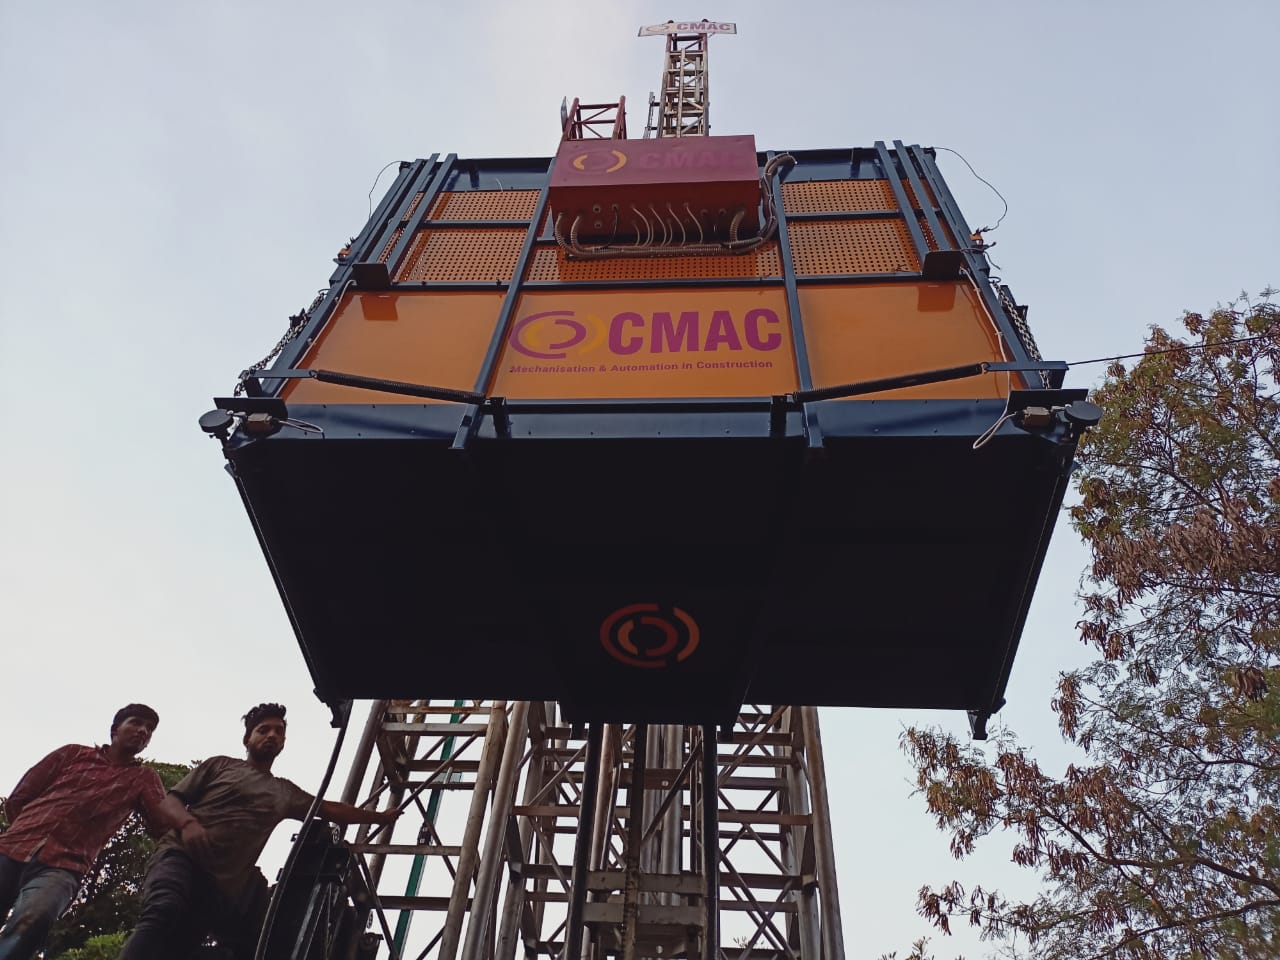 Manufacturers of hoist in India